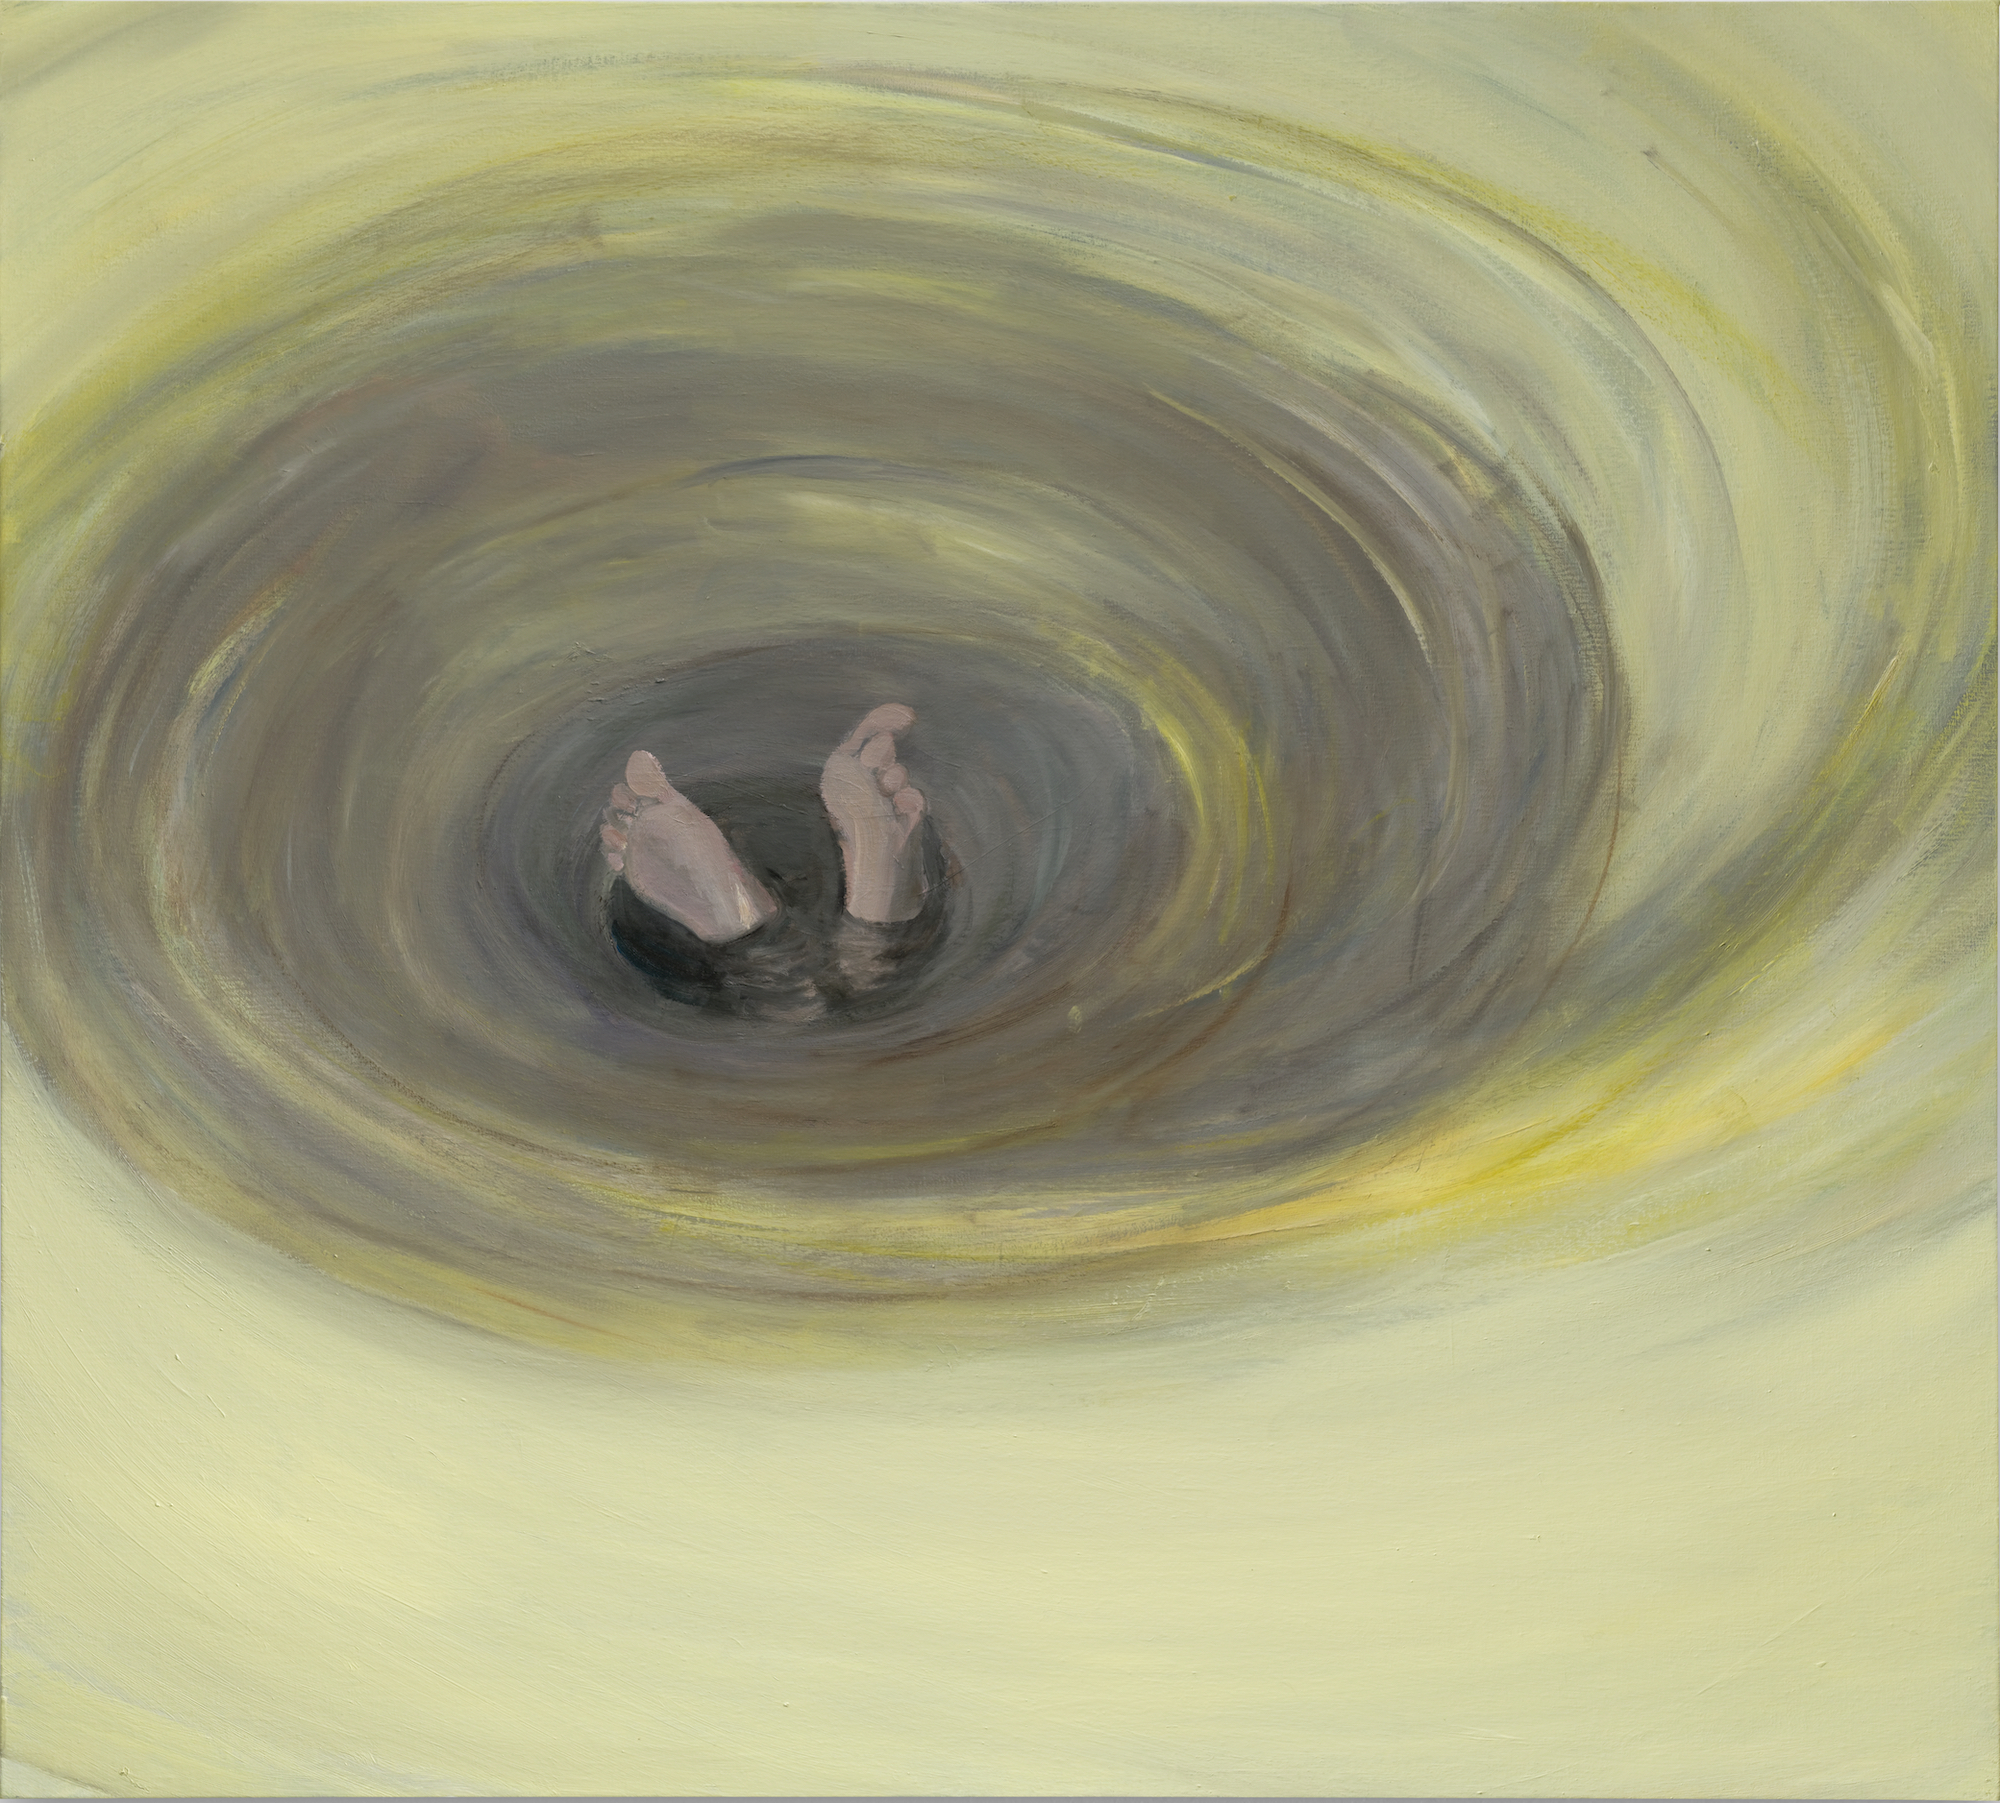 a painting of bare feet falling in a whirlwind by Xinyi Cheng